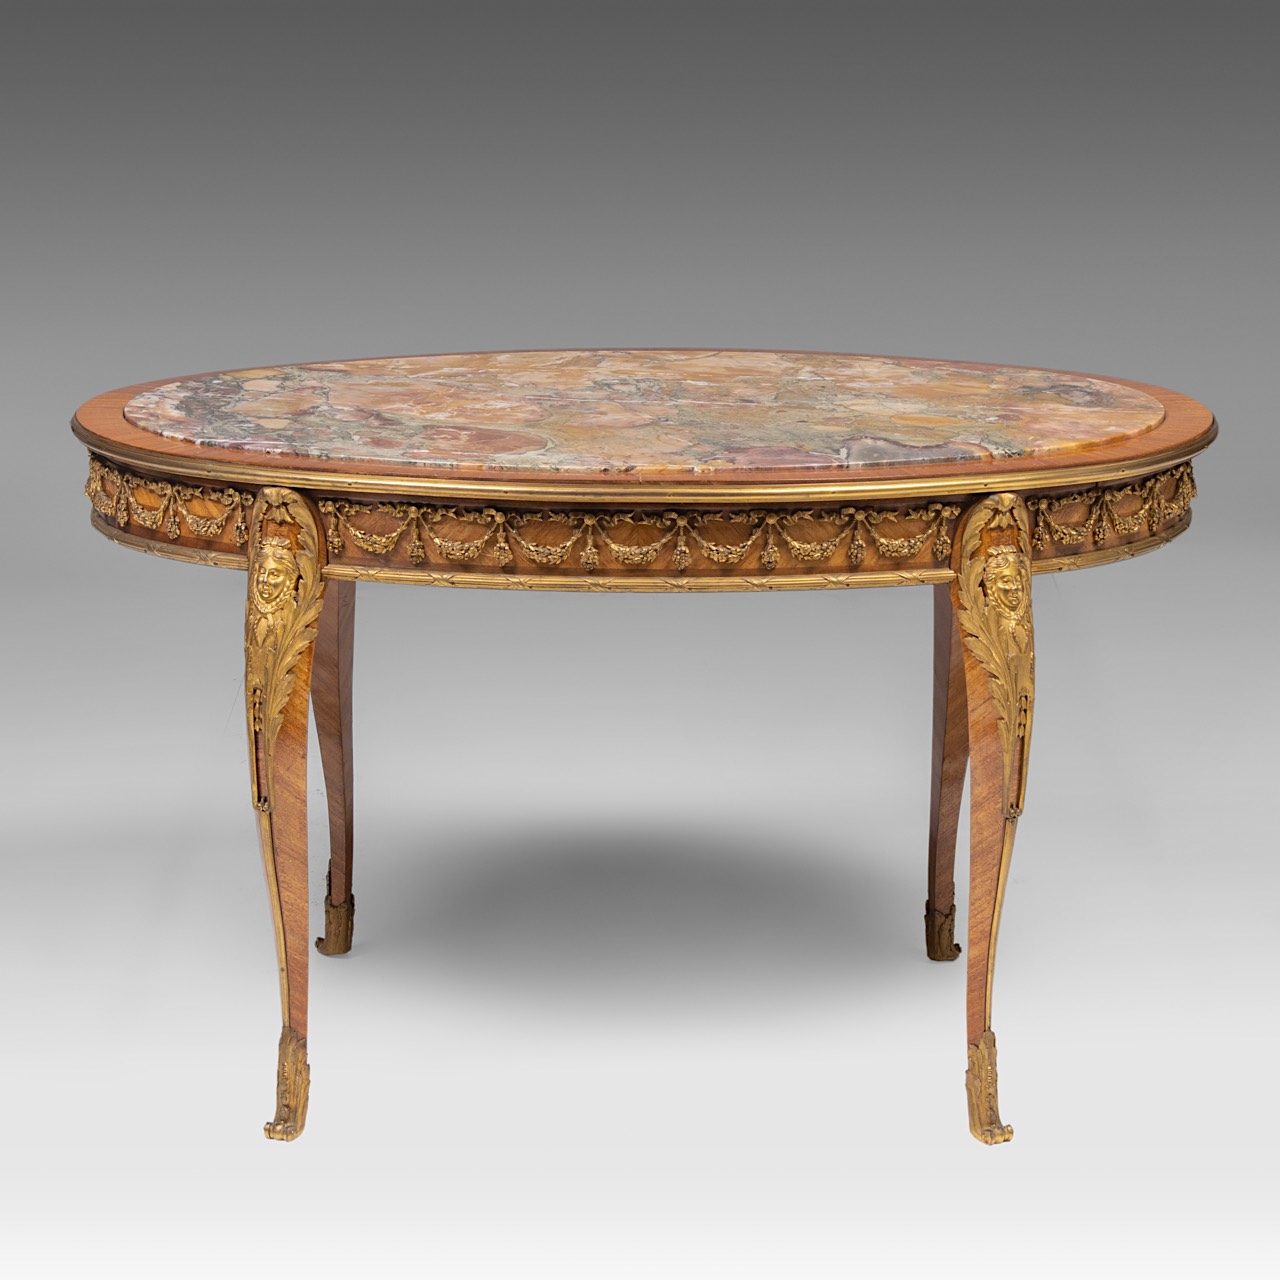 A mahogany marble-topped transitional-style side table with gilt bronze mounts, H 58 cm - W 100 cm - - Image 2 of 7